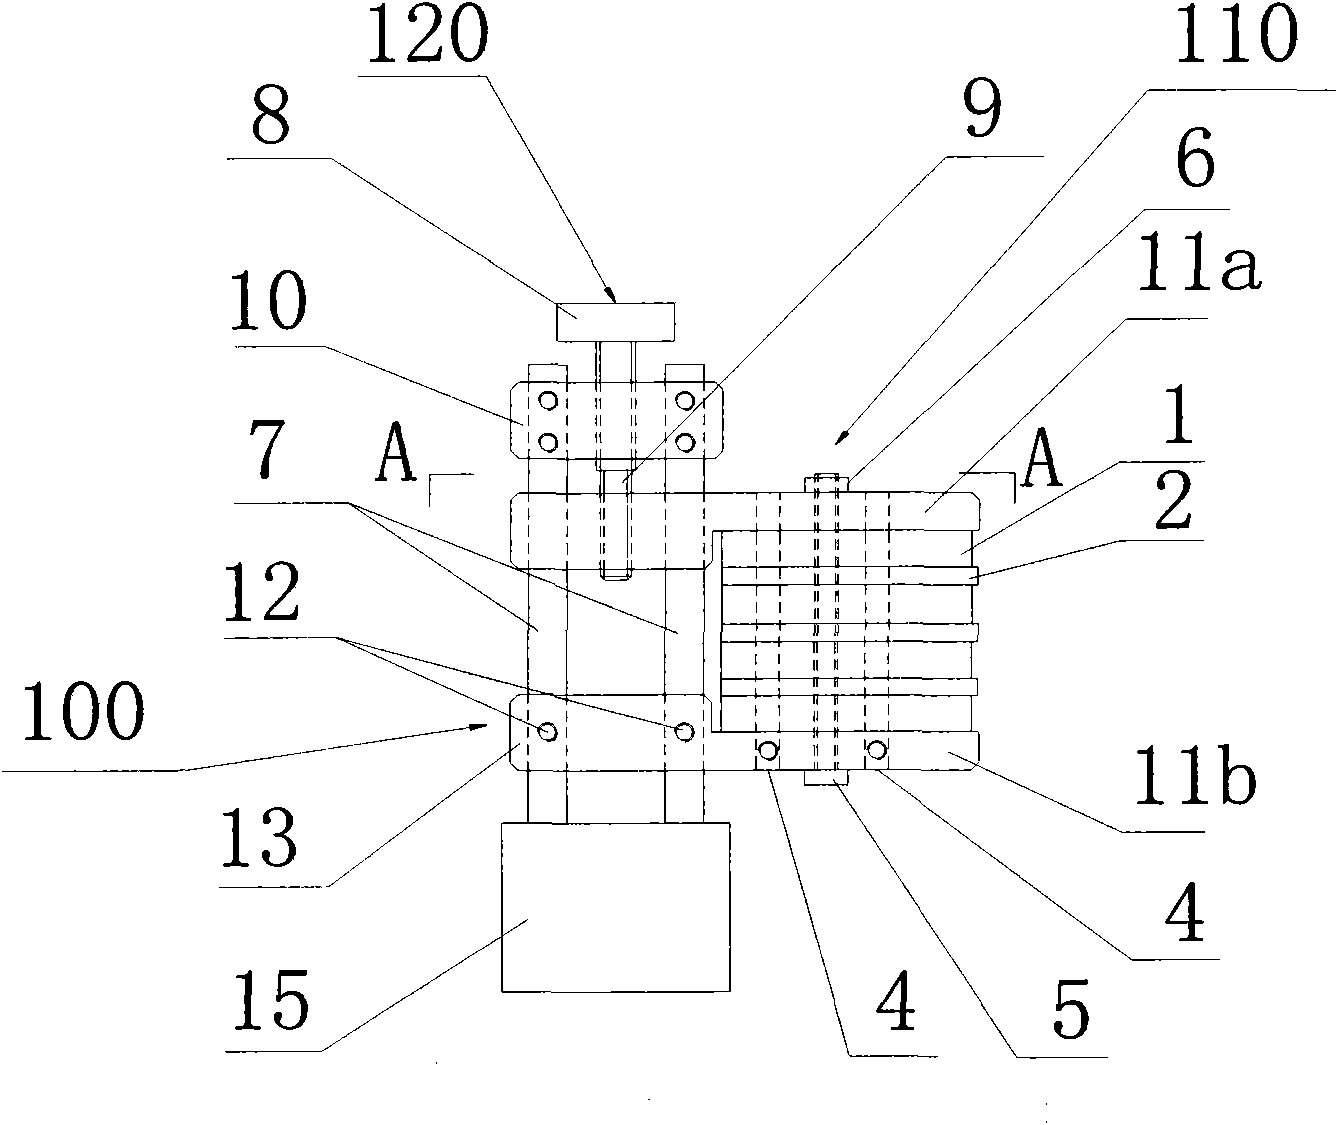 Film guiding device for guiding positioning of films